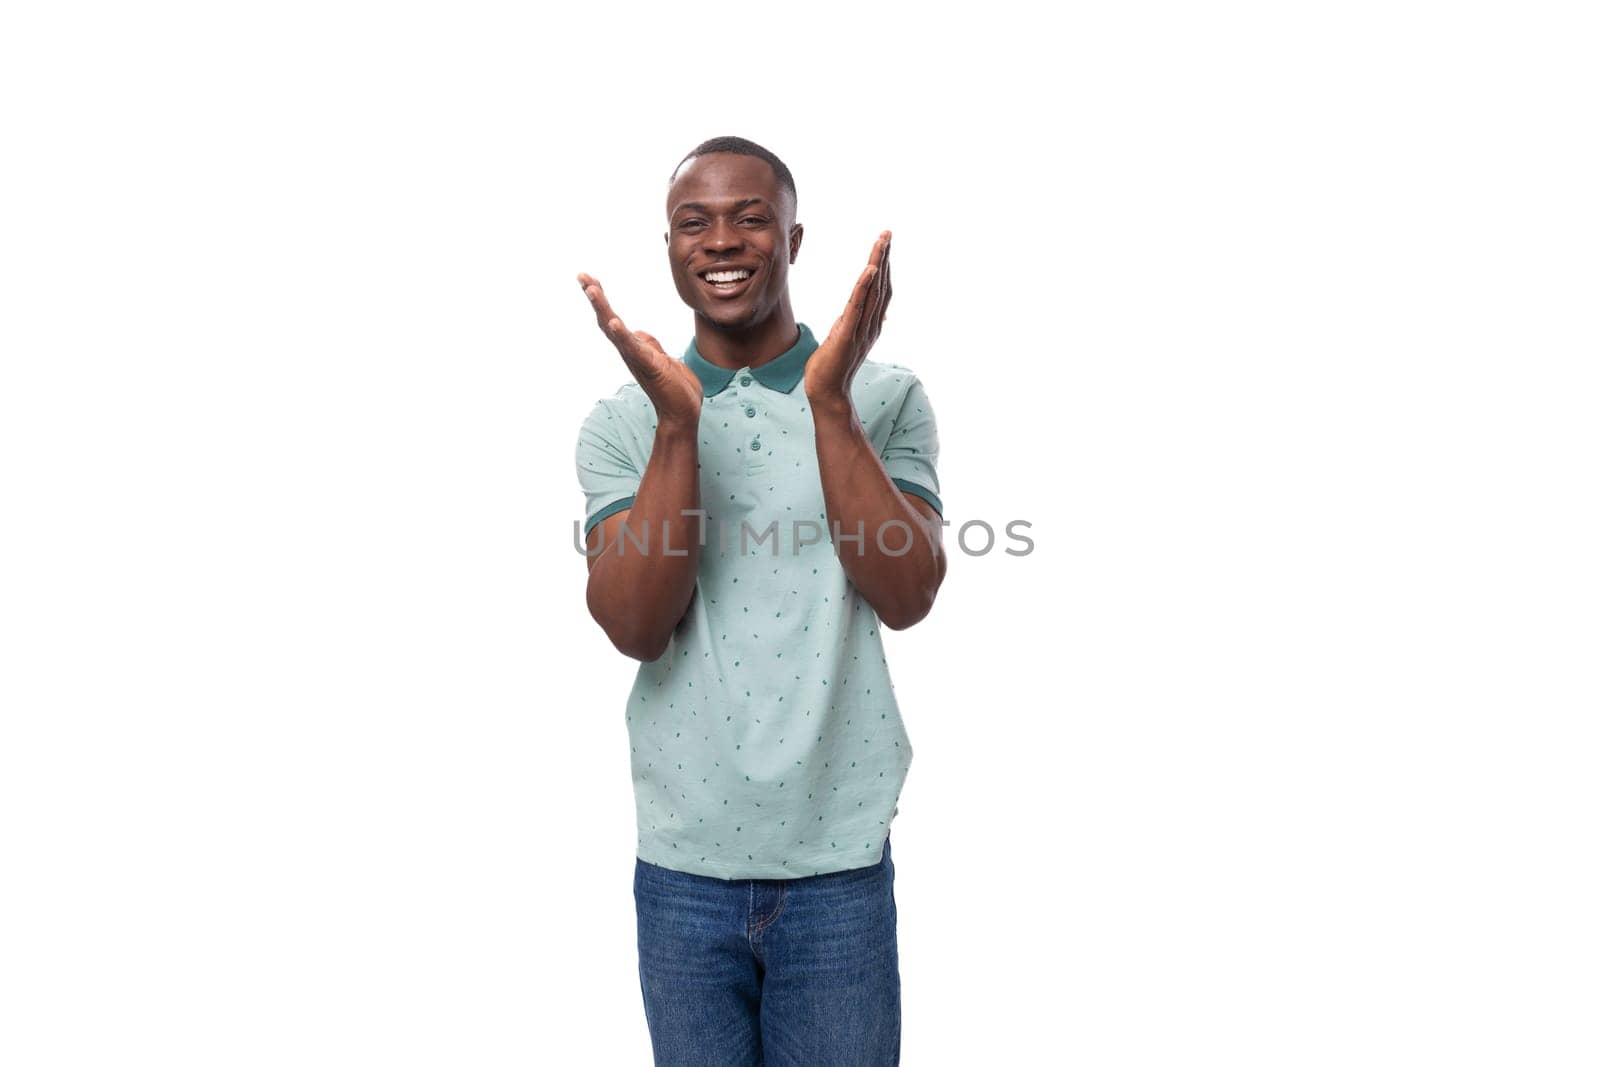 young friendly african guy with short haircut wearing mint collared t-shirt smiling.